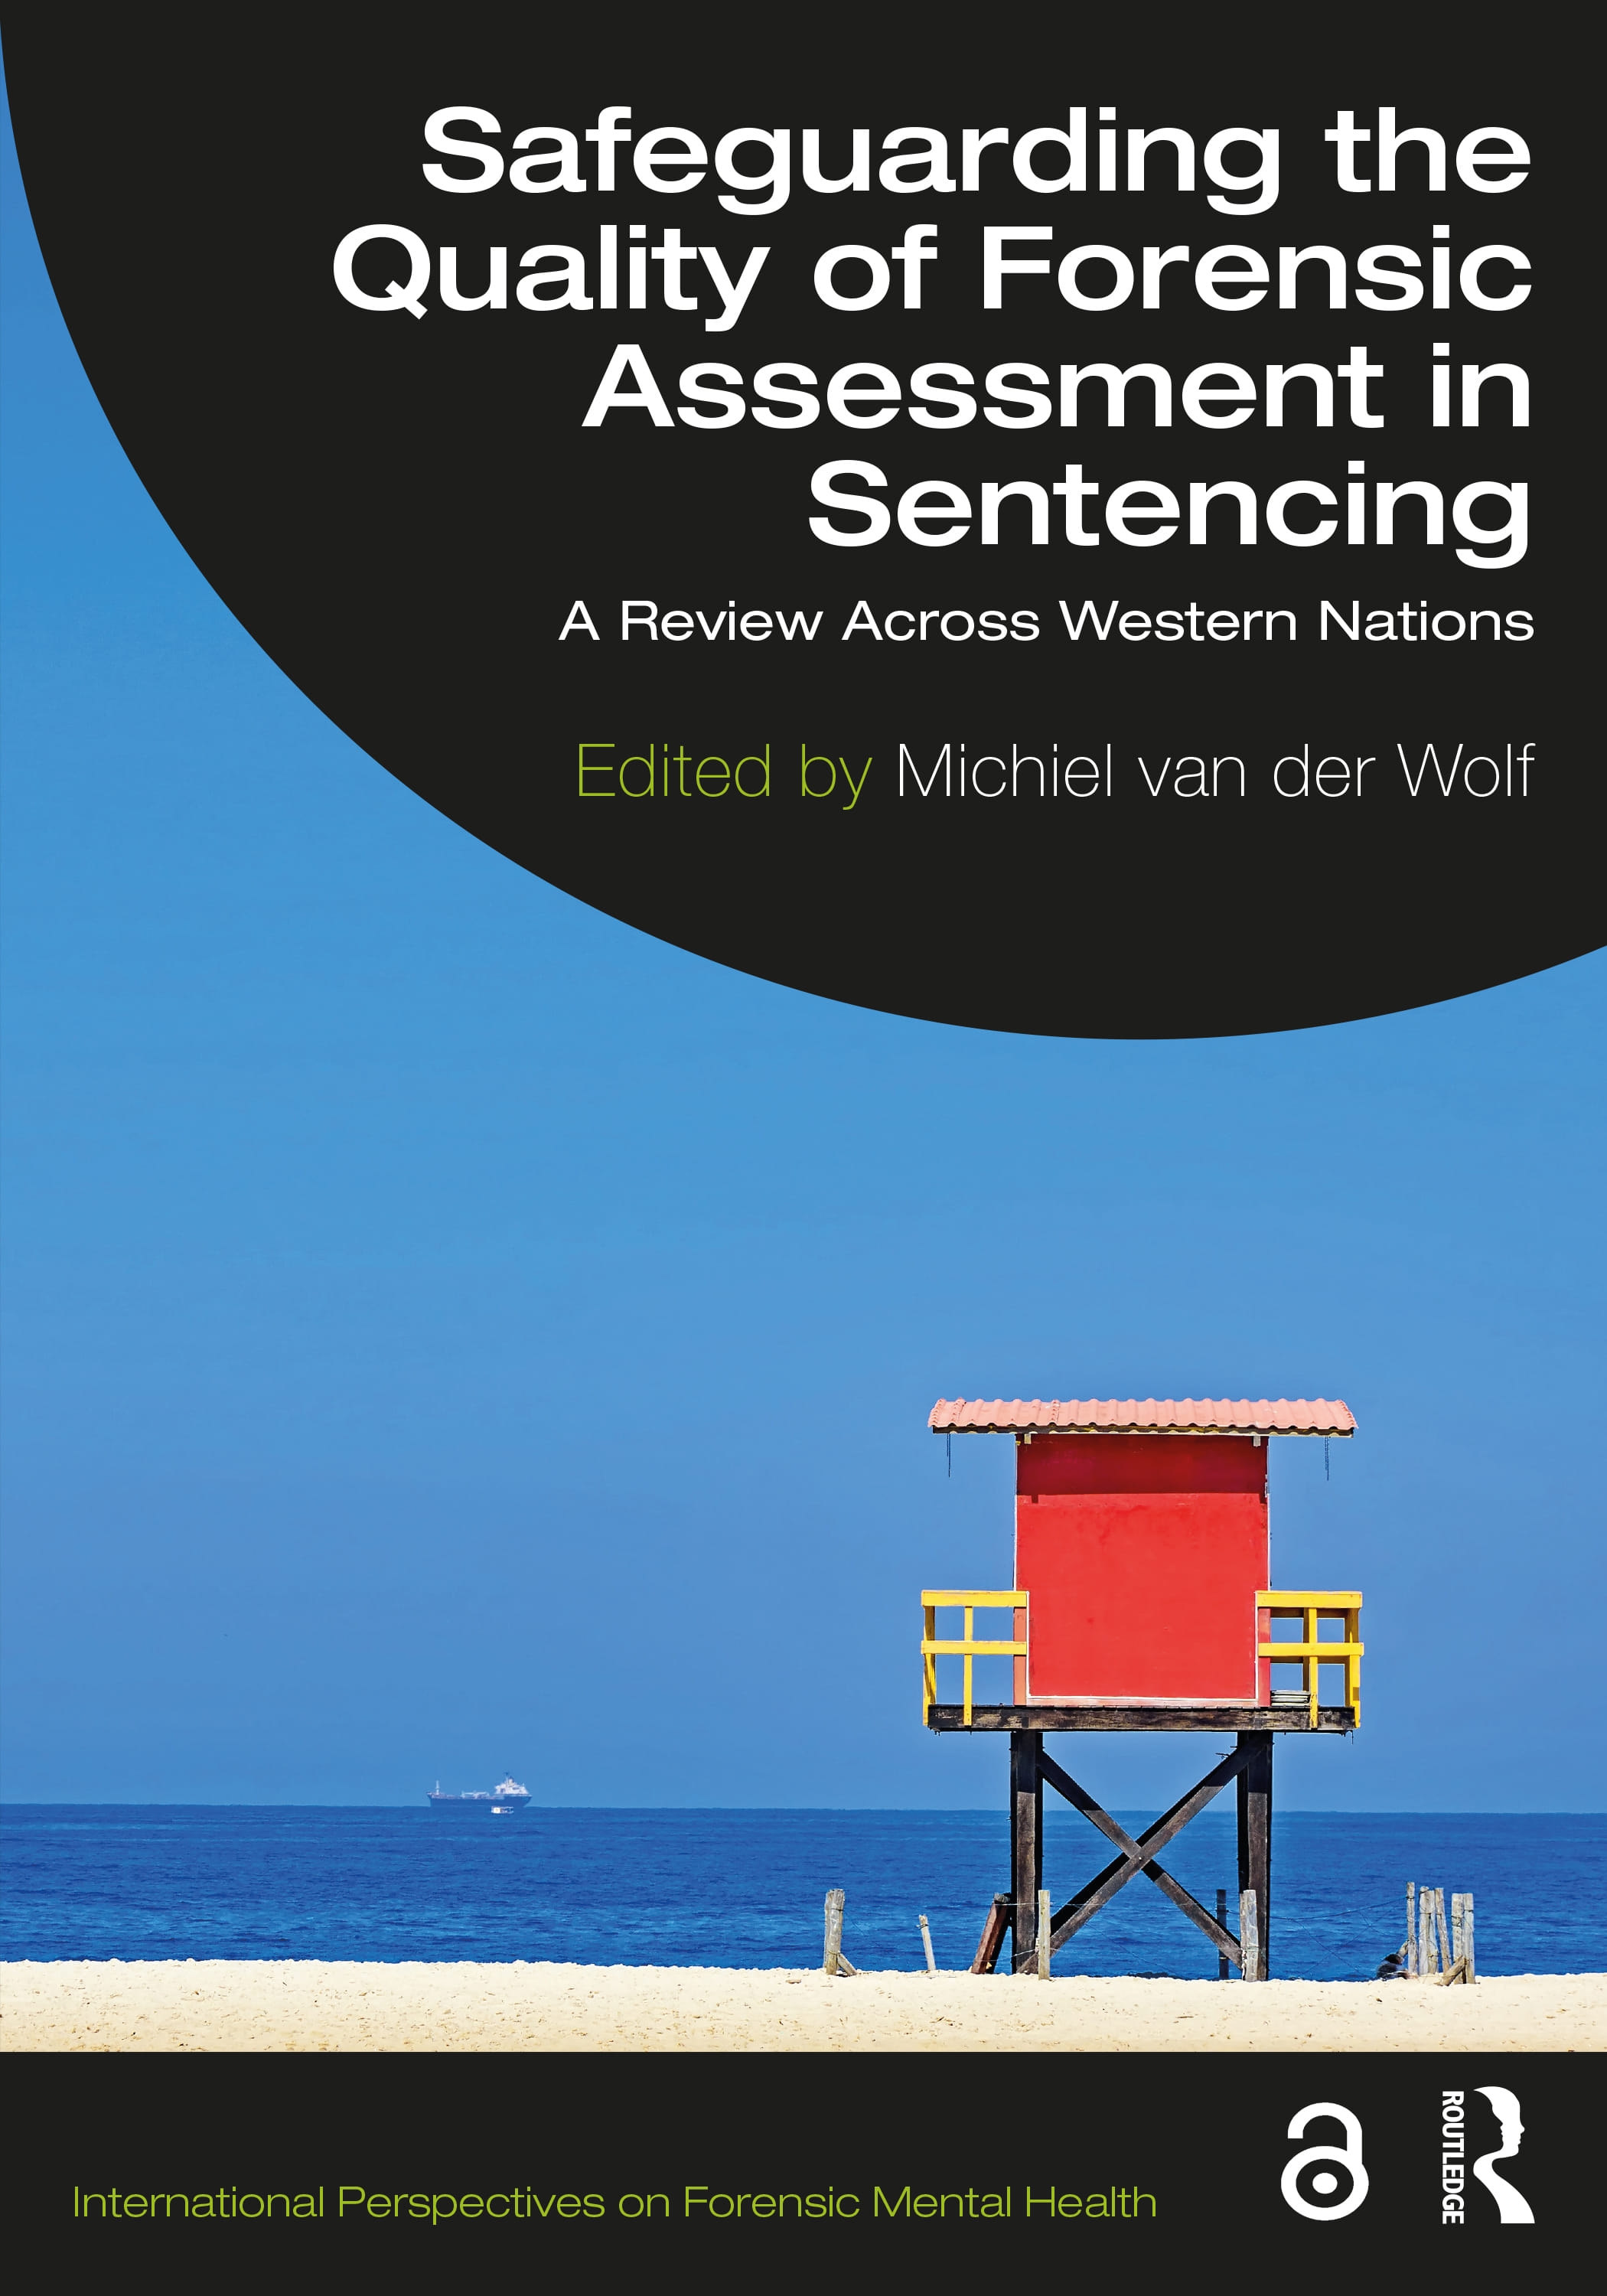 Safeguarding Forensic Violence Risk Assessment: A Review Across Western Nations